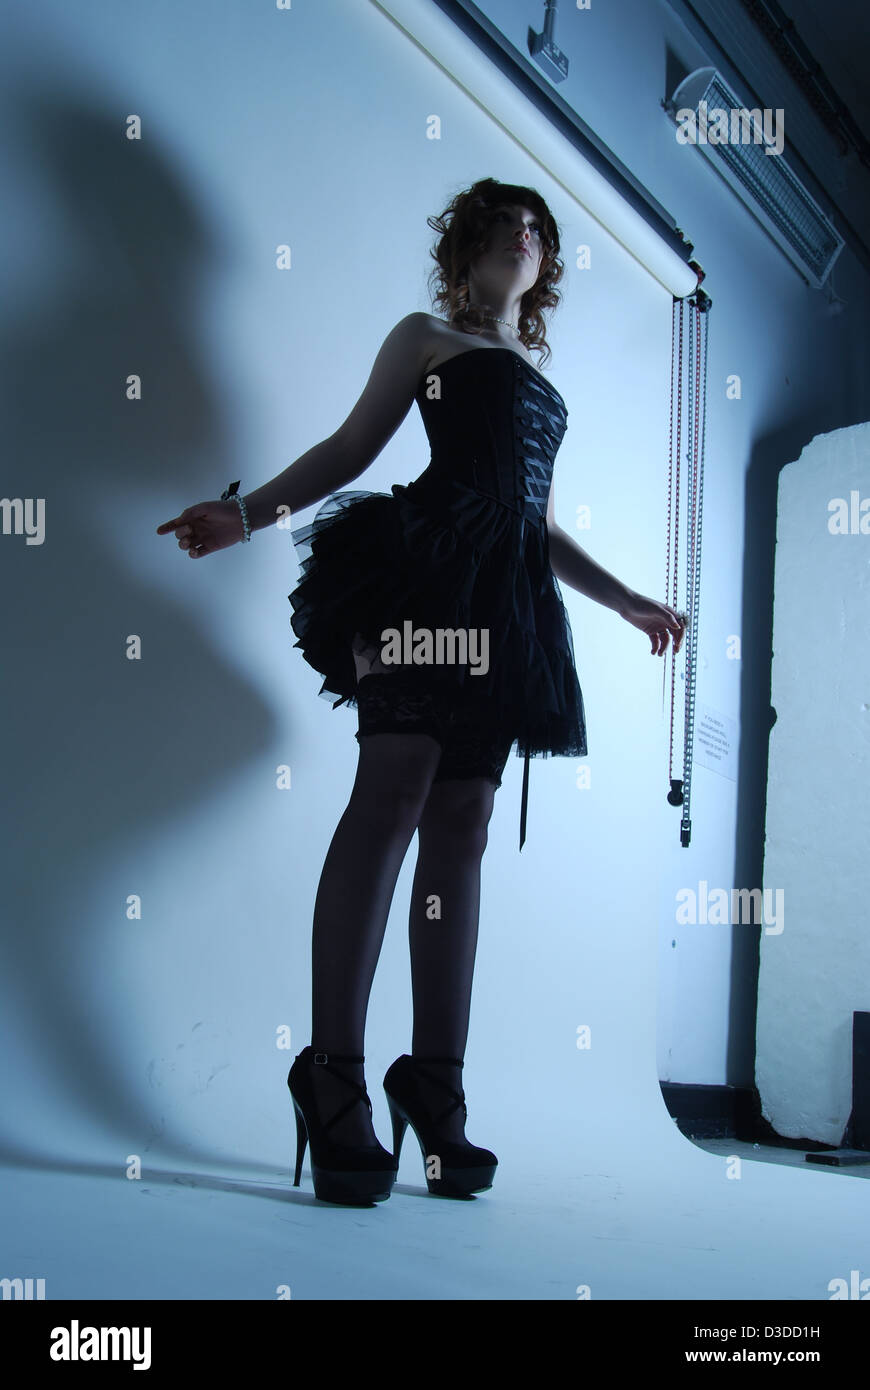 Tall model silhouette of a female in a studio setting with background in short black dress posing with high heels for fashion shot Stock Photo